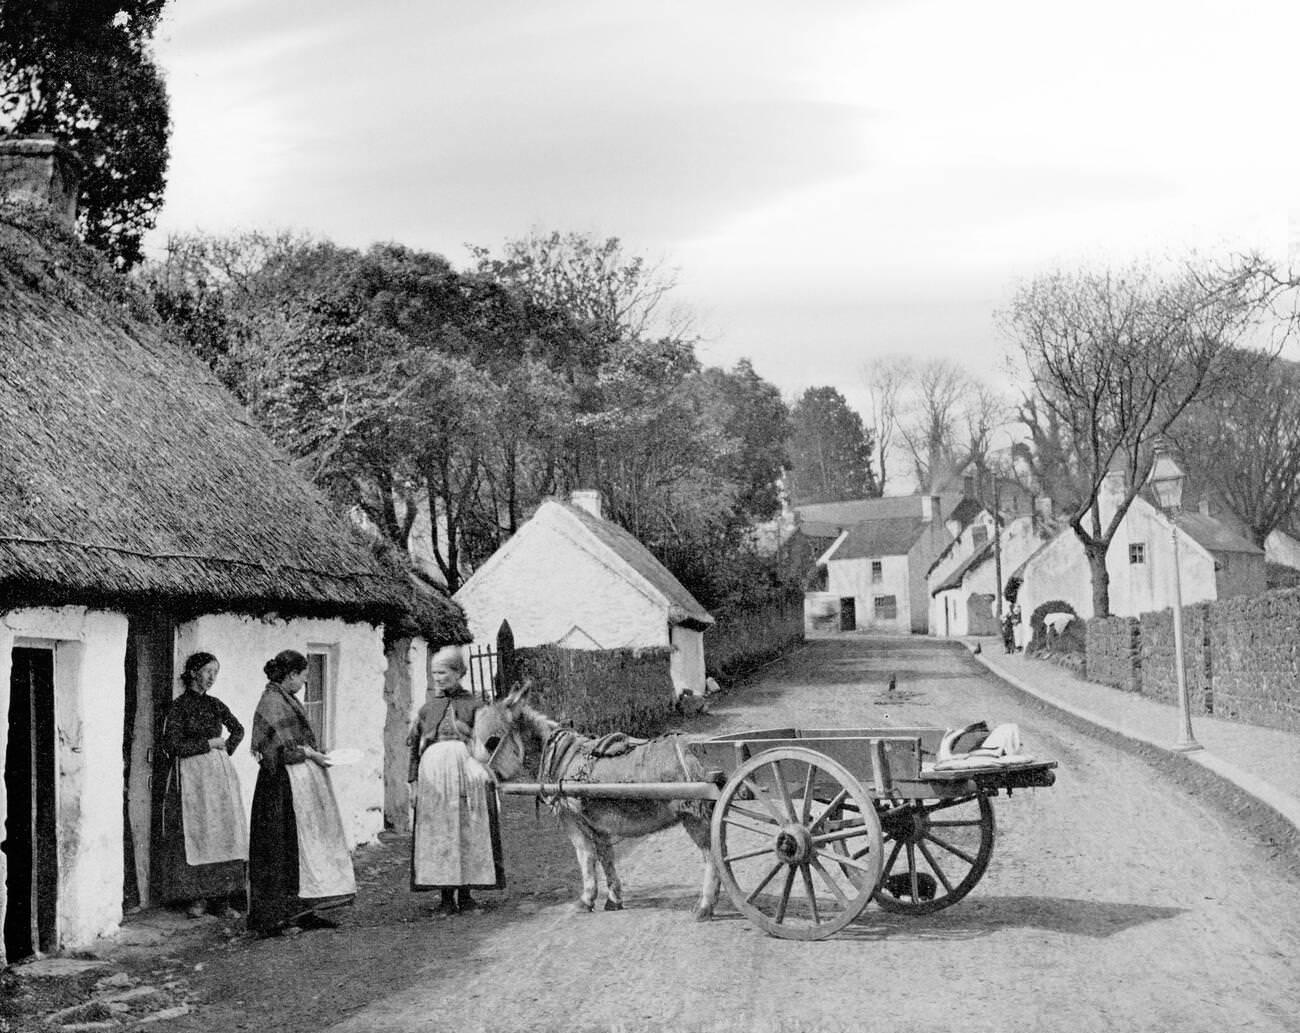 Village street life near the Dublin/Wicklow coast in which a fishwoman with donkey and cart sells produce to locals.